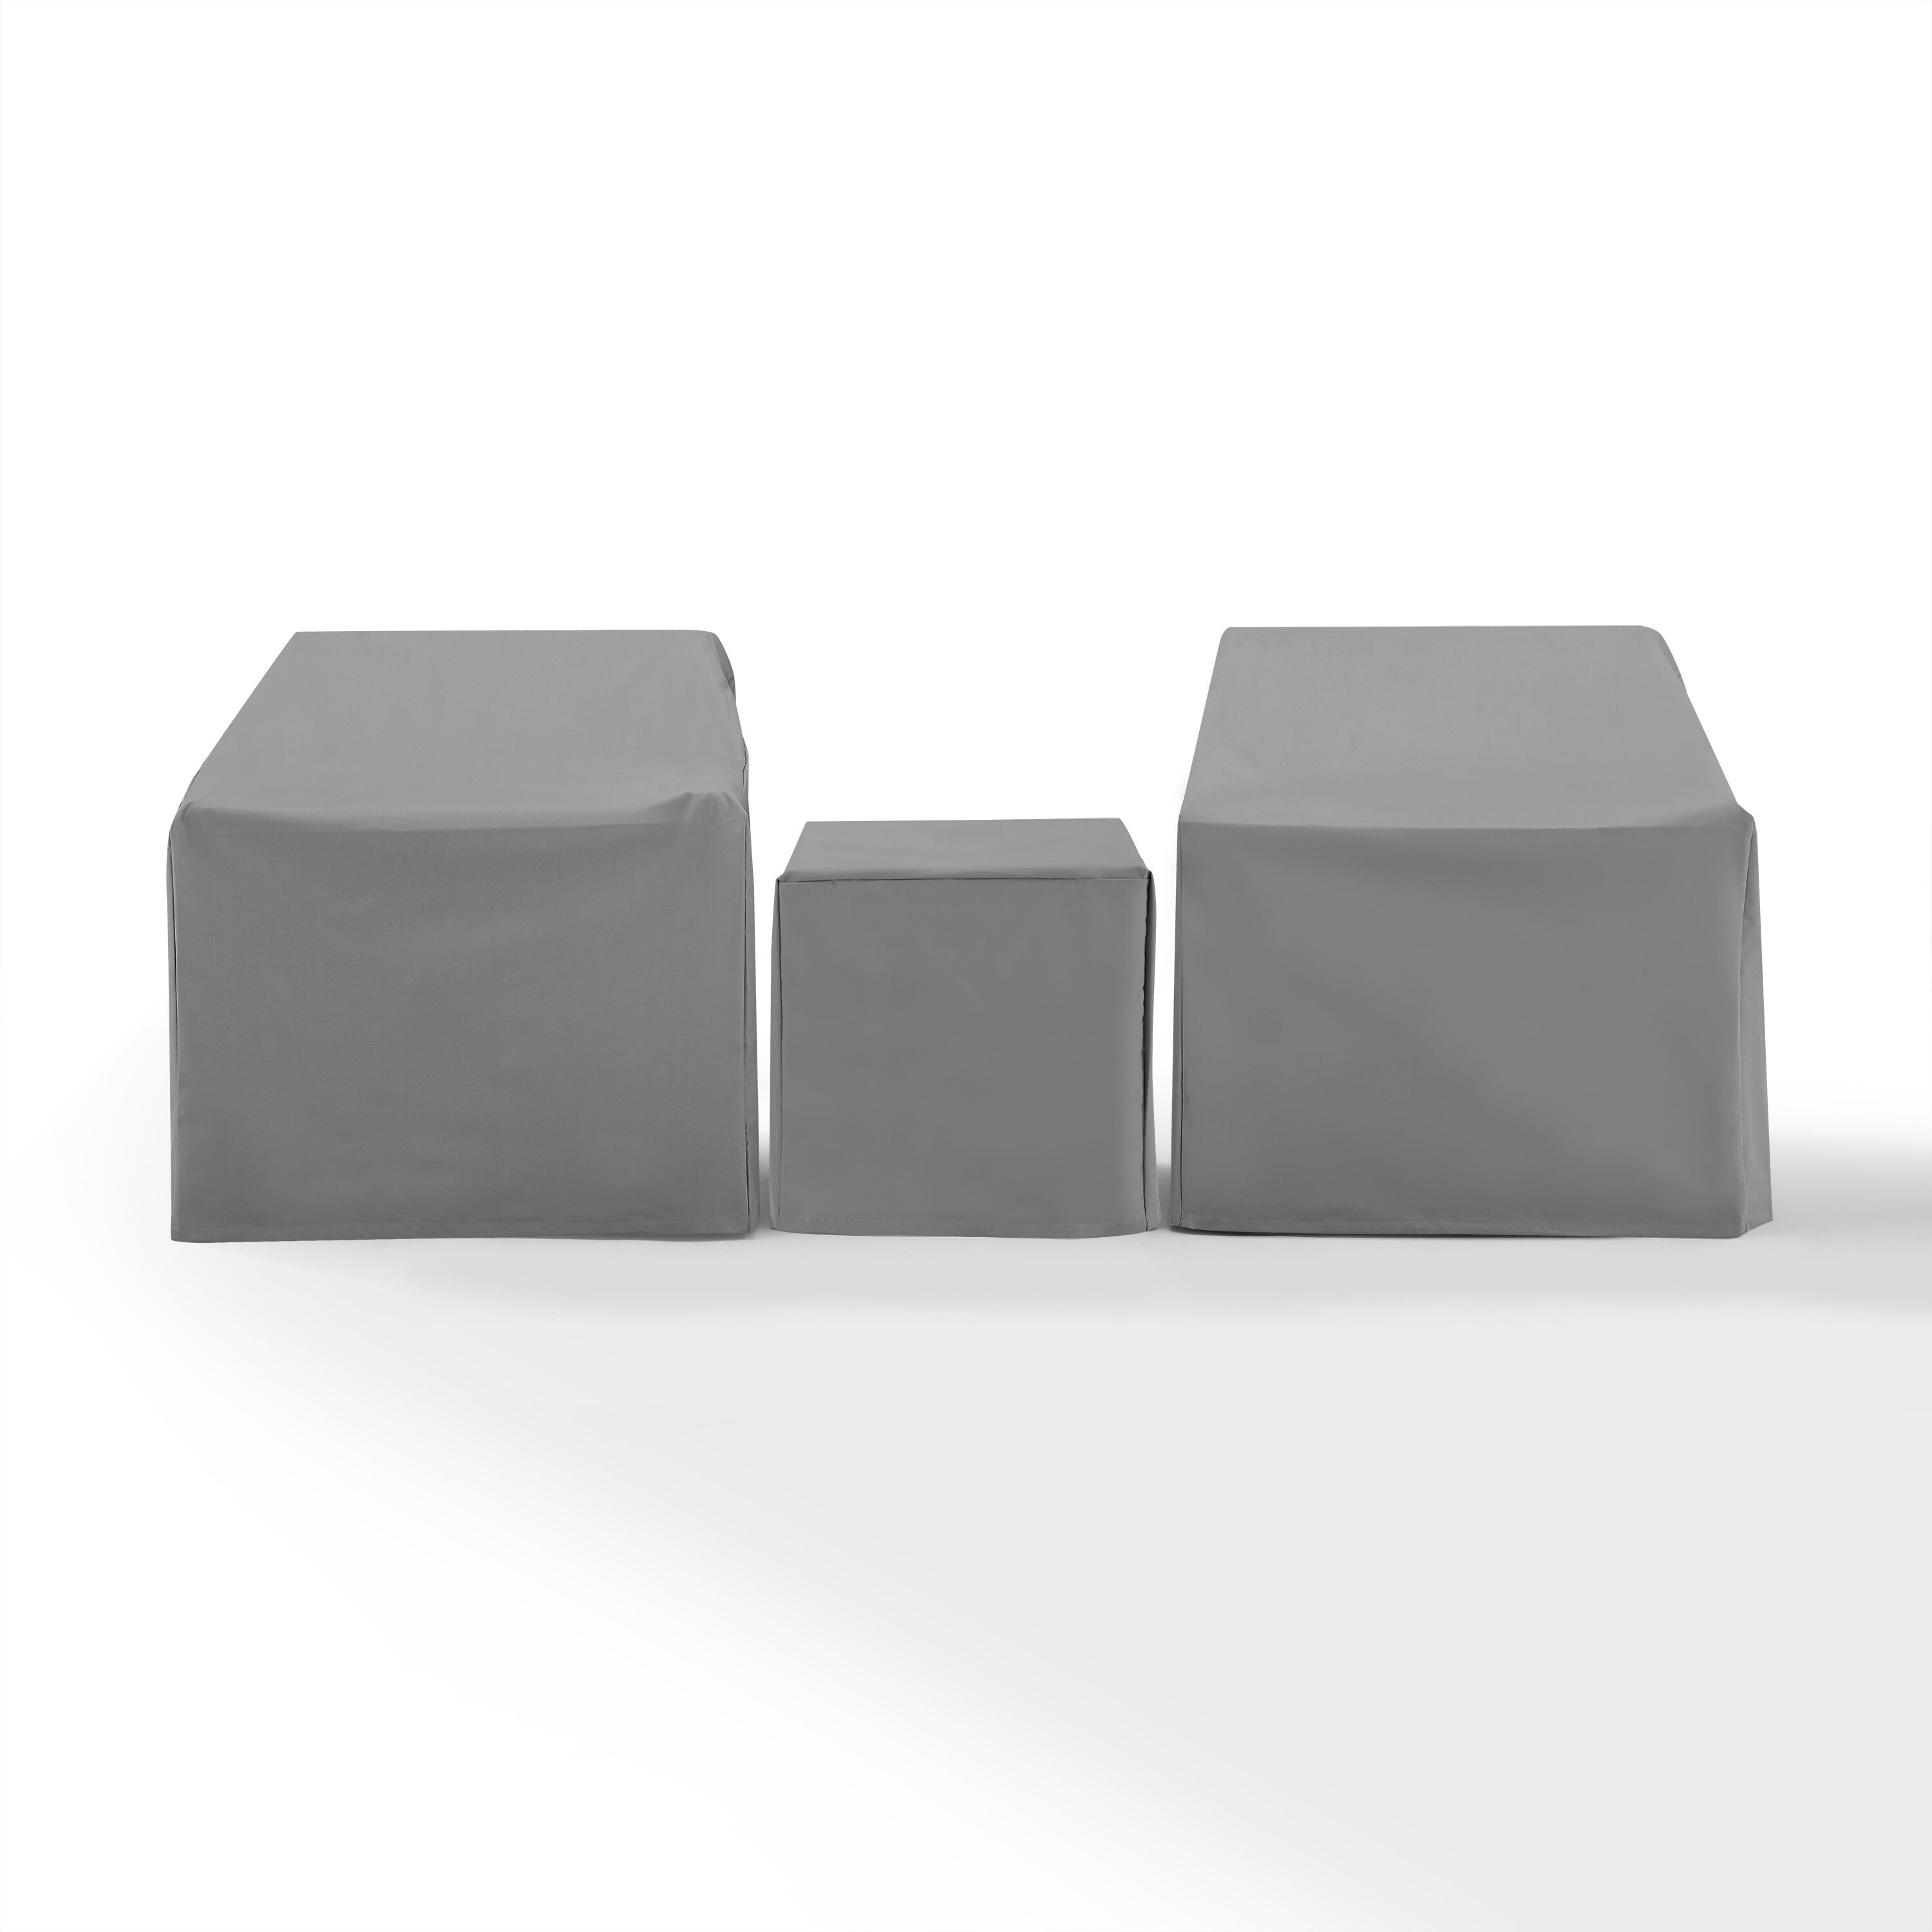 3Pc Furniture Cover Set - image 1 of 7